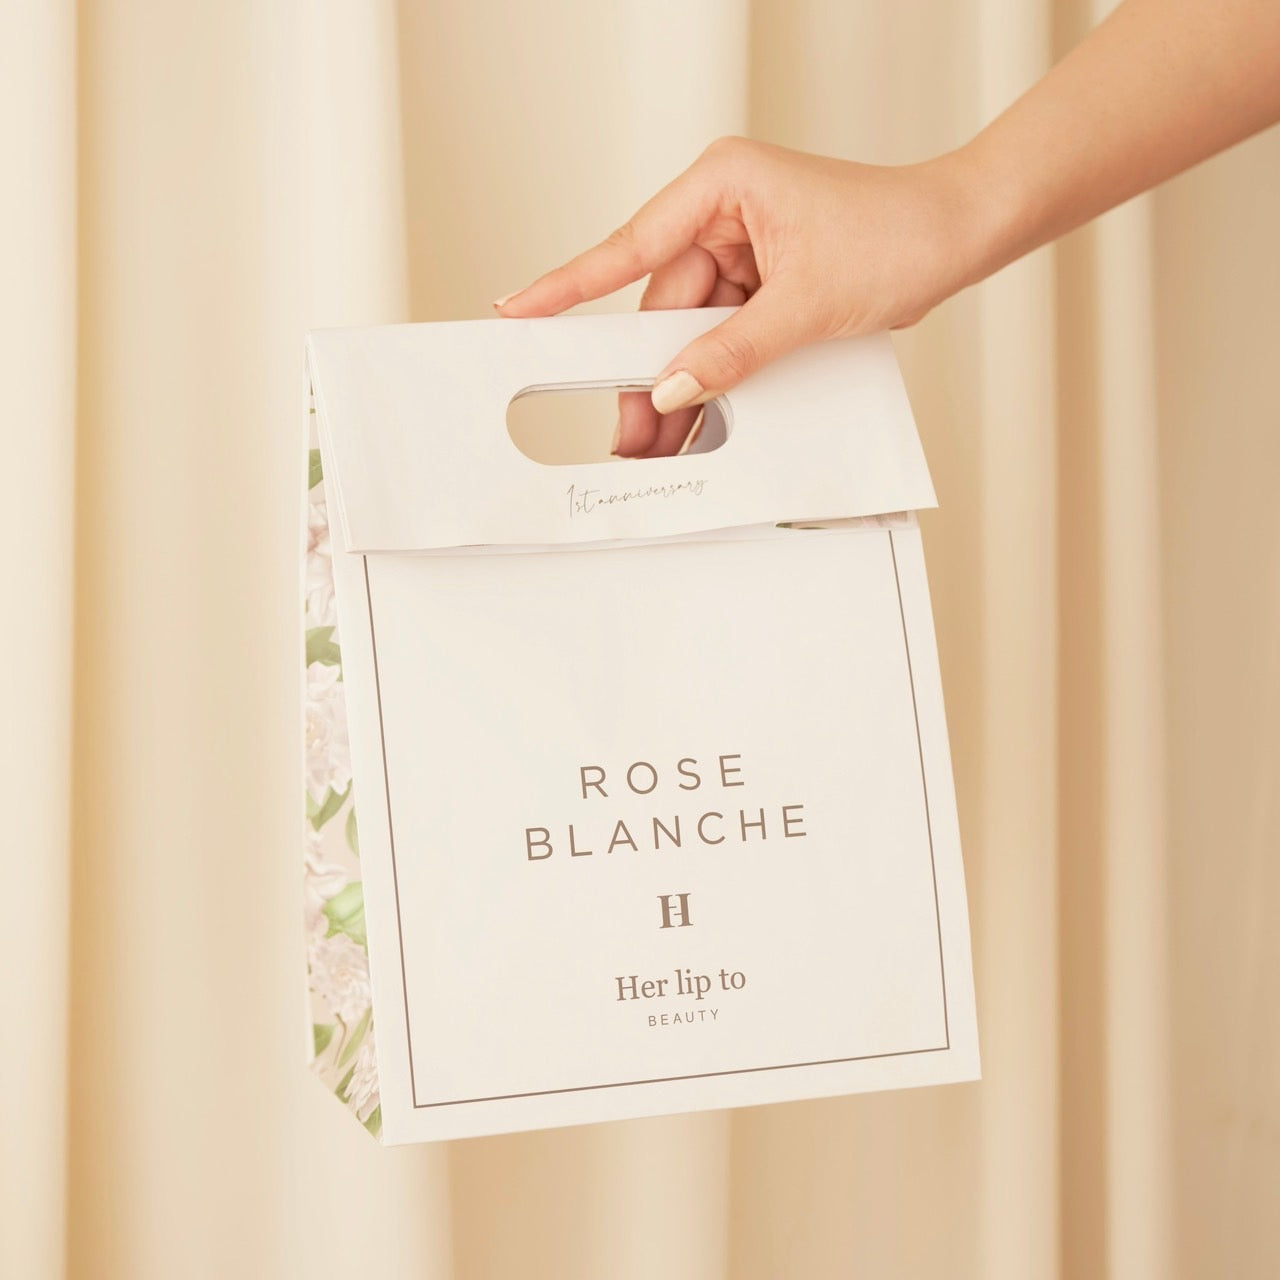 Her lip to BEAUTY × ROSIER by Her lip to POP UP SHOP at FUKUOKA IWATAY